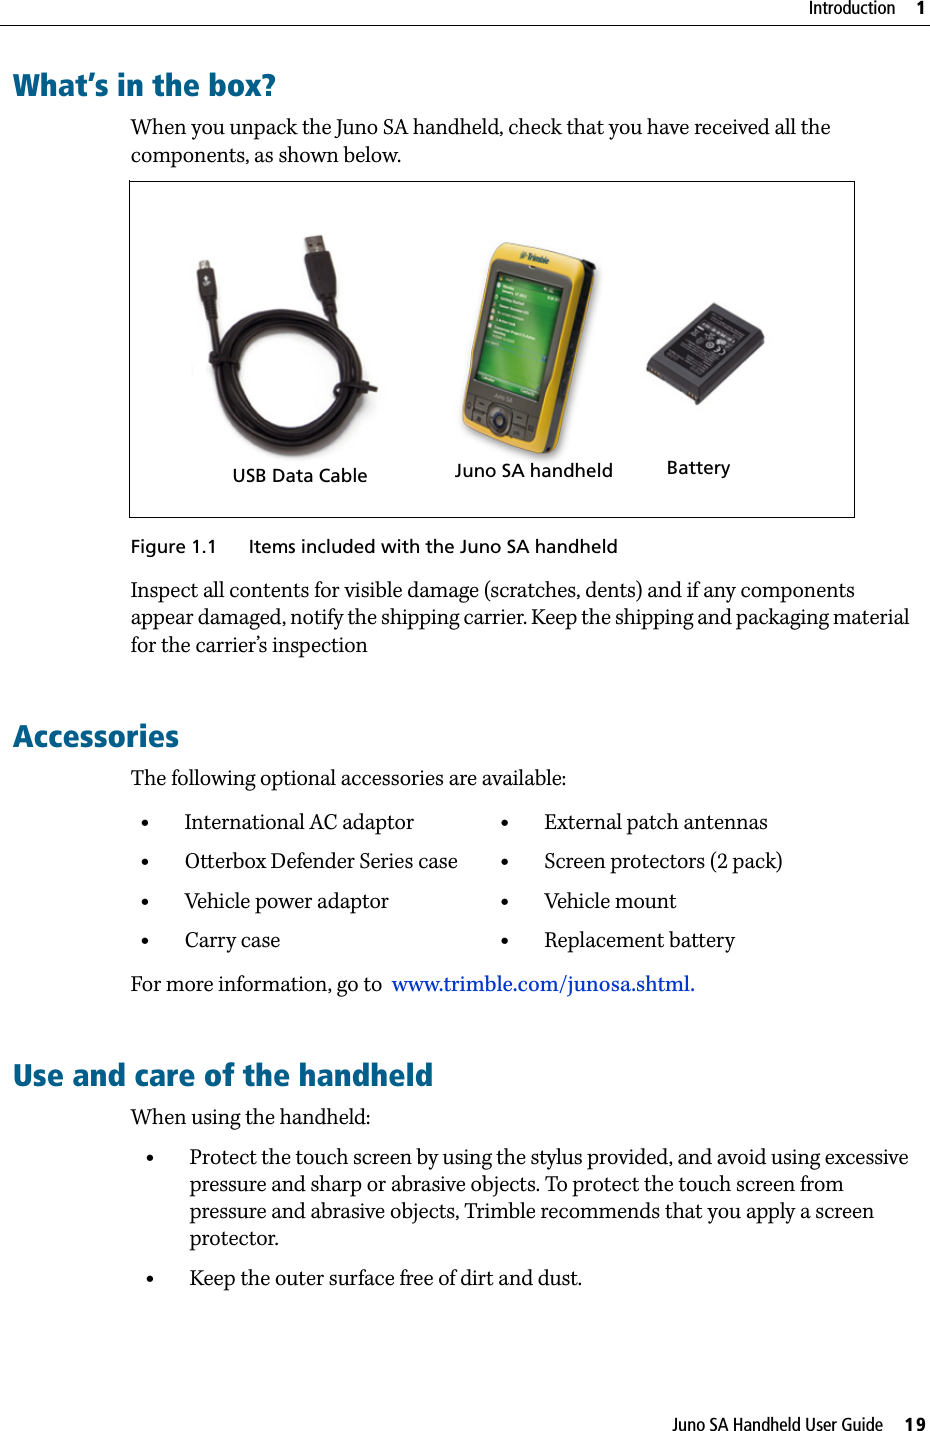 Juno SA Handheld User Guide     19Introduction     1What’s in the box?When you unpack the Juno SA handheld, check that you have received all the components, as shown below. Figure 1.1 Items included with the Juno SA handheldInspect all contents for visible damage (scratches, dents) and if any components appear damaged, notify the shipping carrier. Keep the shipping and packaging material for the carrier’s inspection      AccessoriesThe following optional accessories are available:For more information, go to  www.trimble.com/junosa.shtml.Use and care of the handheldWhen using the handheld:•Protect the touch screen by using the stylus provided, and avoid using excessive pressure and sharp or abrasive objects. To protect the touch screen from pressure and abrasive objects, Trimble recommends that you apply a screen protector.•Keep the outer surface free of dirt and dust.•International AC adaptor•Otterbox Defender Series case•Vehicle power adaptor•Carry case•External patch antennas•Screen protectors (2 pack)•Vehicle mount•Replacement battery       BatteryJuno SA handheldUSB Data Cable